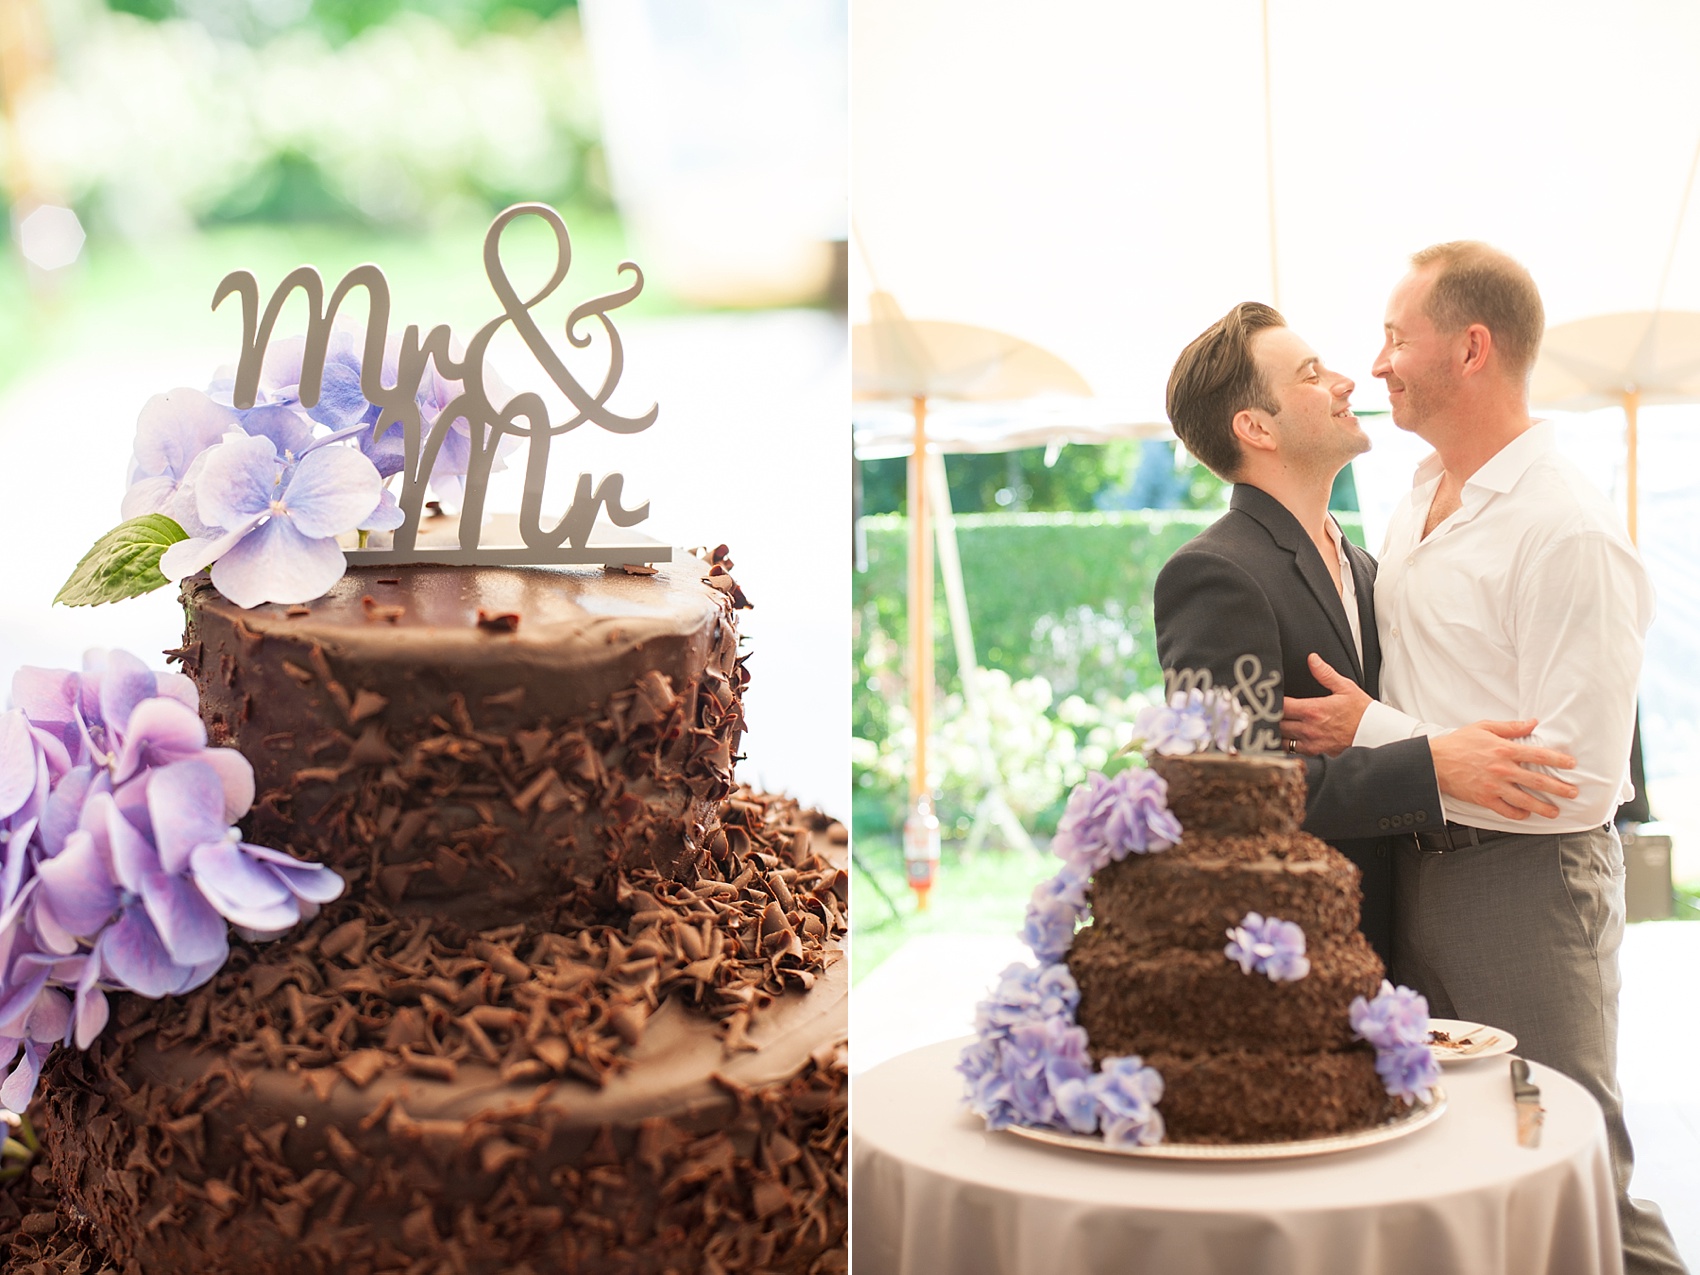 Mr. & Mr. cake topper on a chocolate shavings tiered cake for a gay, same-sex wedding in the Hamptons. Photos by NYC photographer, Mikkel Paige Photography.